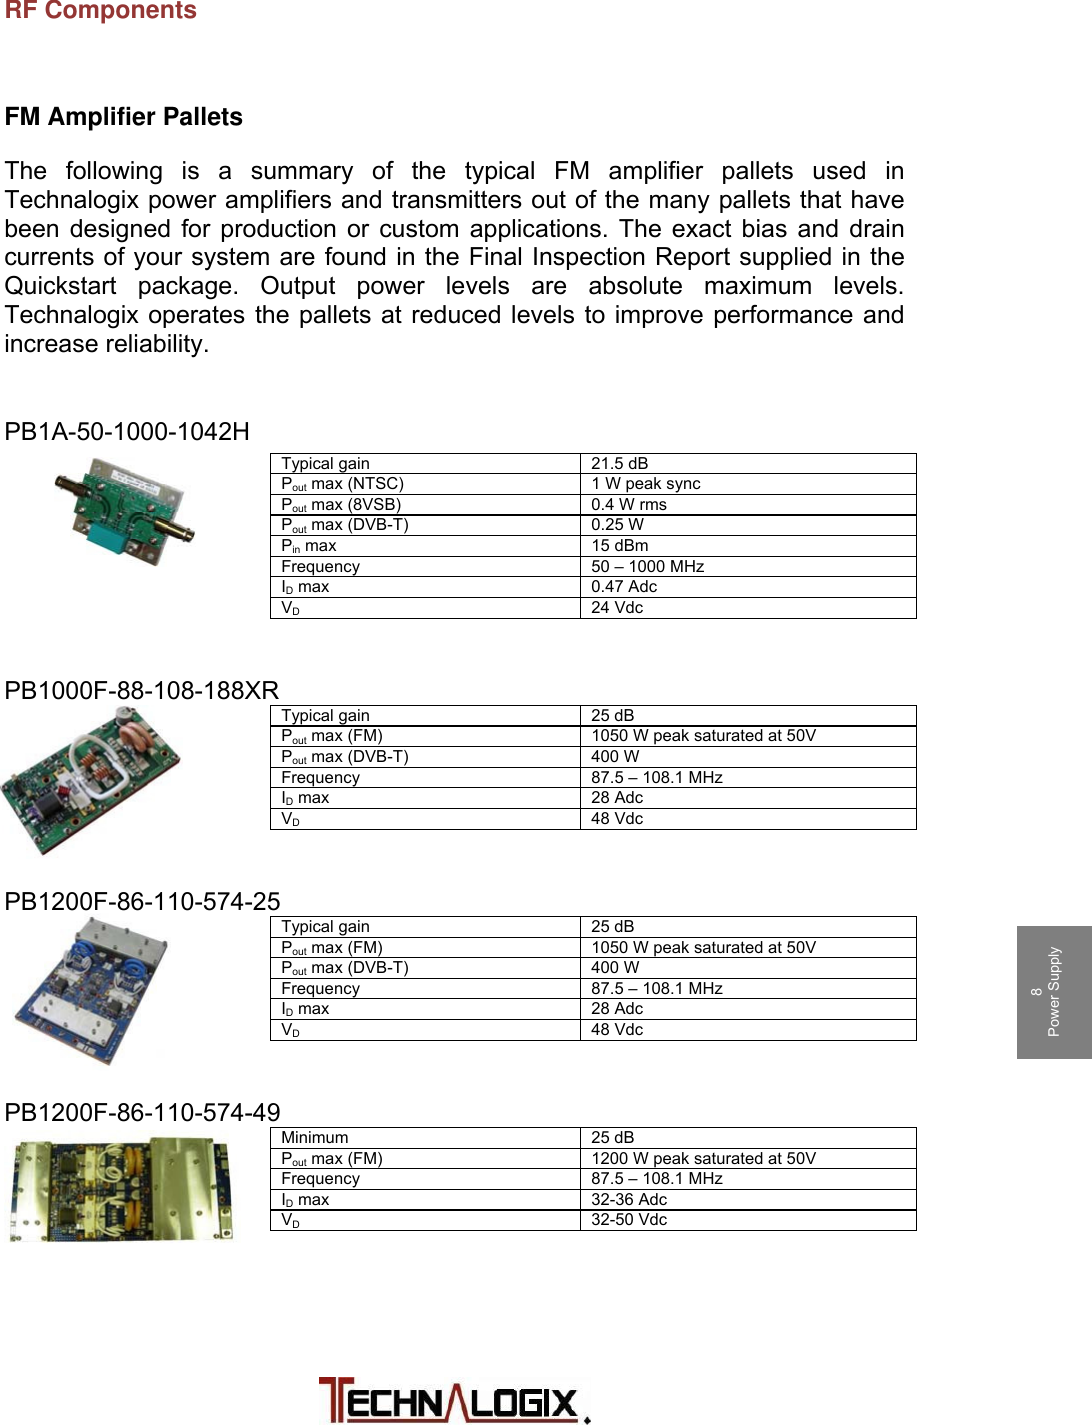         1 Safeguards  2 Terms and Warranty 3 Principle of Operation 4 Installation 5 Operation 6 Control System 7 RF Components 8 Power Supply 9 Maintenance 10 Troubleshooting RF Components  FM Amplifier Pallets The following is a summary of the typical FM amplifier pallets used in Technalogix power amplifiers and transmitters out of the many pallets that have been designed for production or custom applications. The exact bias and drain currents of your system are found in the Final Inspection Report supplied in the Quickstart package. Output power levels are absolute maximum levels. Technalogix operates the pallets at reduced levels to improve performance and increase reliability.  PB1A-50-1000-1042H Typical gain  21.5 dB Pout max (NTSC)  1 W peak sync Pout max (8VSB)  0.4 W rms Pout max (DVB-T)  0.25 W Pin max  15 dBm Frequency  50 – 1000 MHz ID max  0.47 Adc VD 24 Vdc   PB1000F-88-108-188XR Typical gain  25 dB Pout max (FM)  1050 W peak saturated at 50V Pout max (DVB-T)  400 W Frequency  87.5 – 108.1 MHz ID max  28 Adc VD 48 Vdc   PB1200F-86-110-574-25 Typical gain  25 dB Pout max (FM)  1050 W peak saturated at 50V Pout max (DVB-T)  400 W Frequency  87.5 – 108.1 MHz ID max  28 Adc VD 48 Vdc   PB1200F-86-110-574-49 Minimum 25 dB Pout max (FM)  1200 W peak saturated at 50V Frequency  87.5 – 108.1 MHz ID max  32-36 Adc VD 32-50 Vdc    